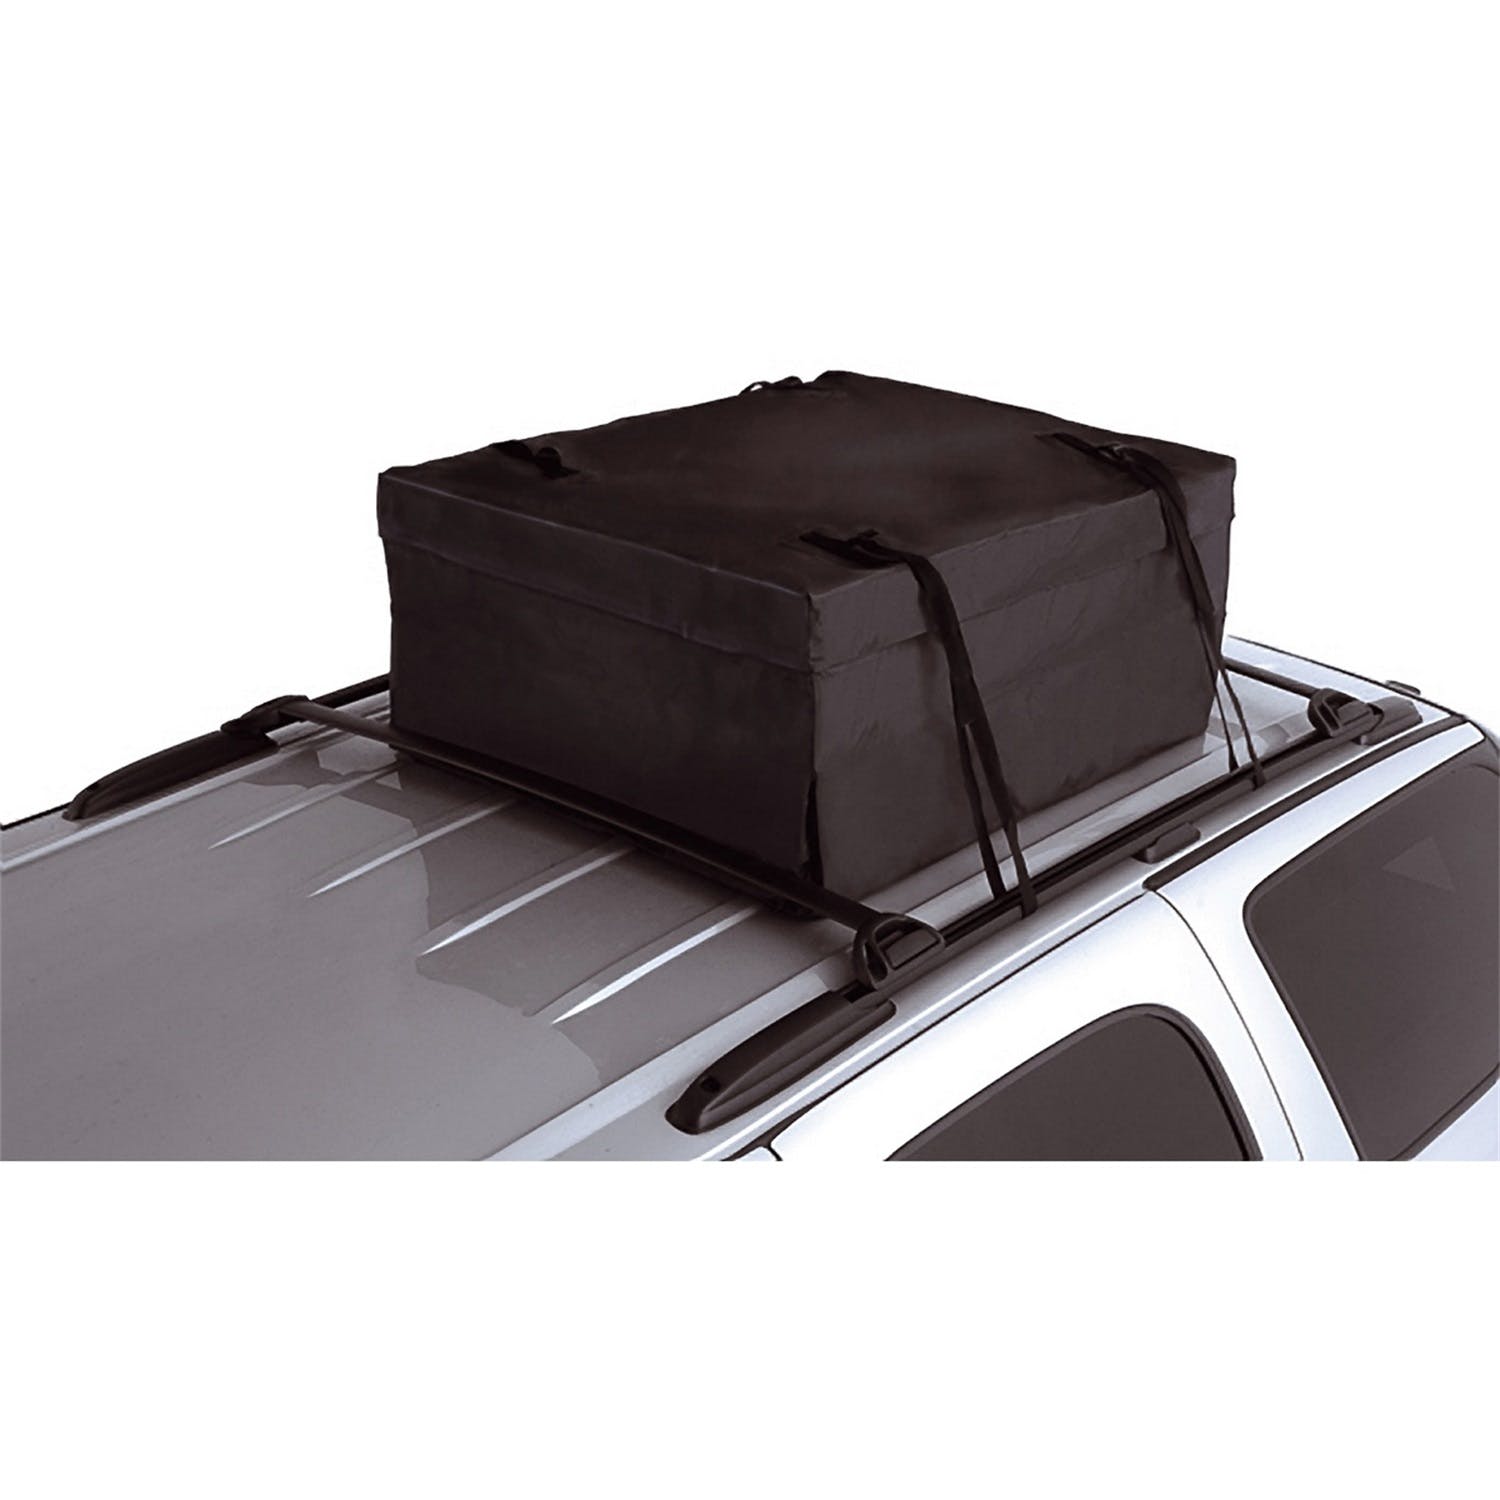 Rugged Ridge 12110.01 Roof Top Storage System; Small